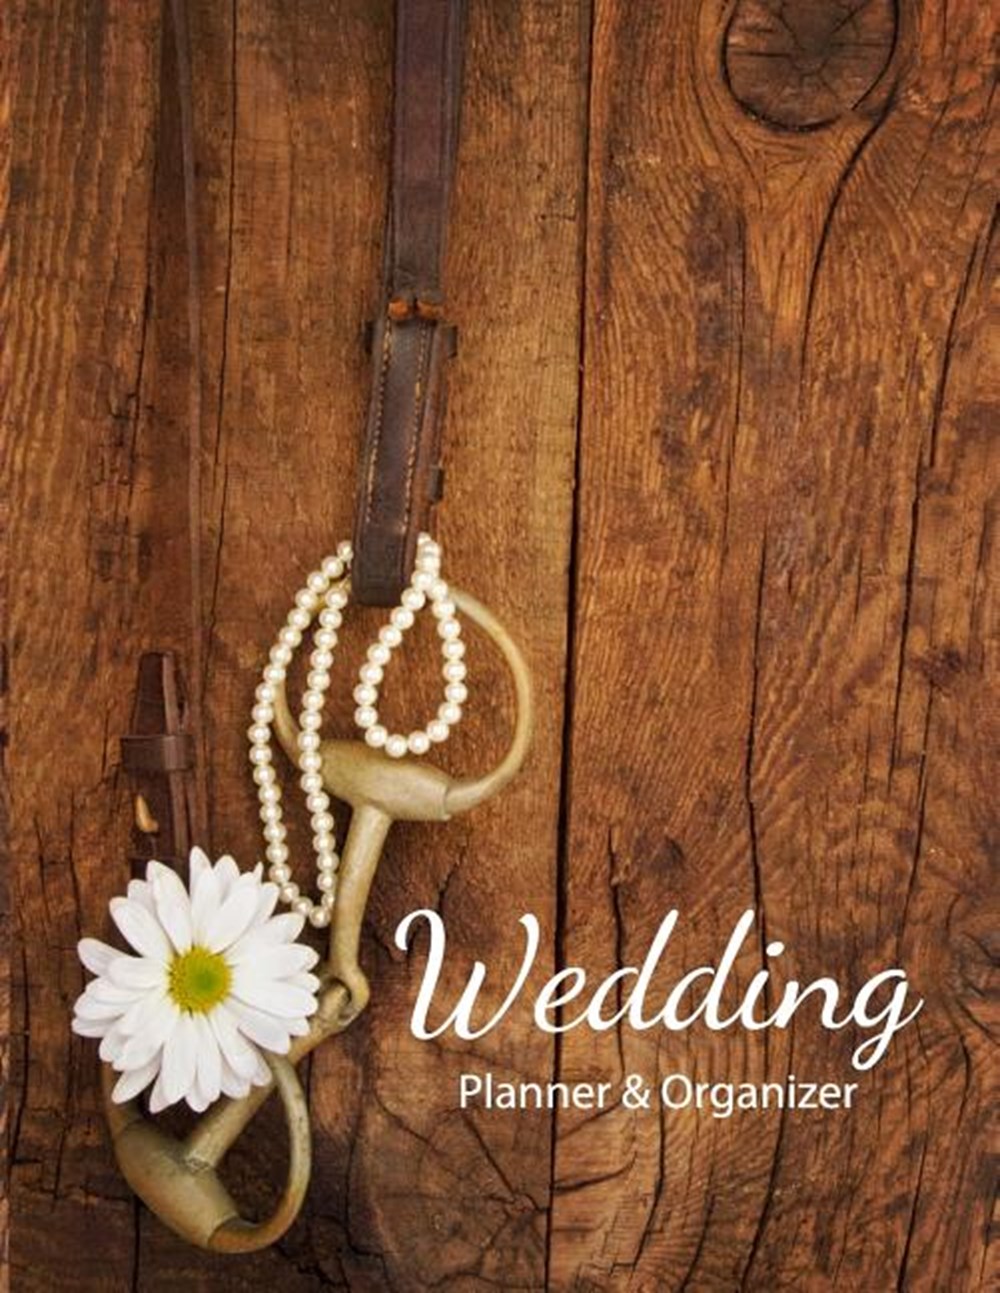 Wedding Planner & Organizer Easy to use checklists, worksheets, charts and tools - Black Bow Tie and